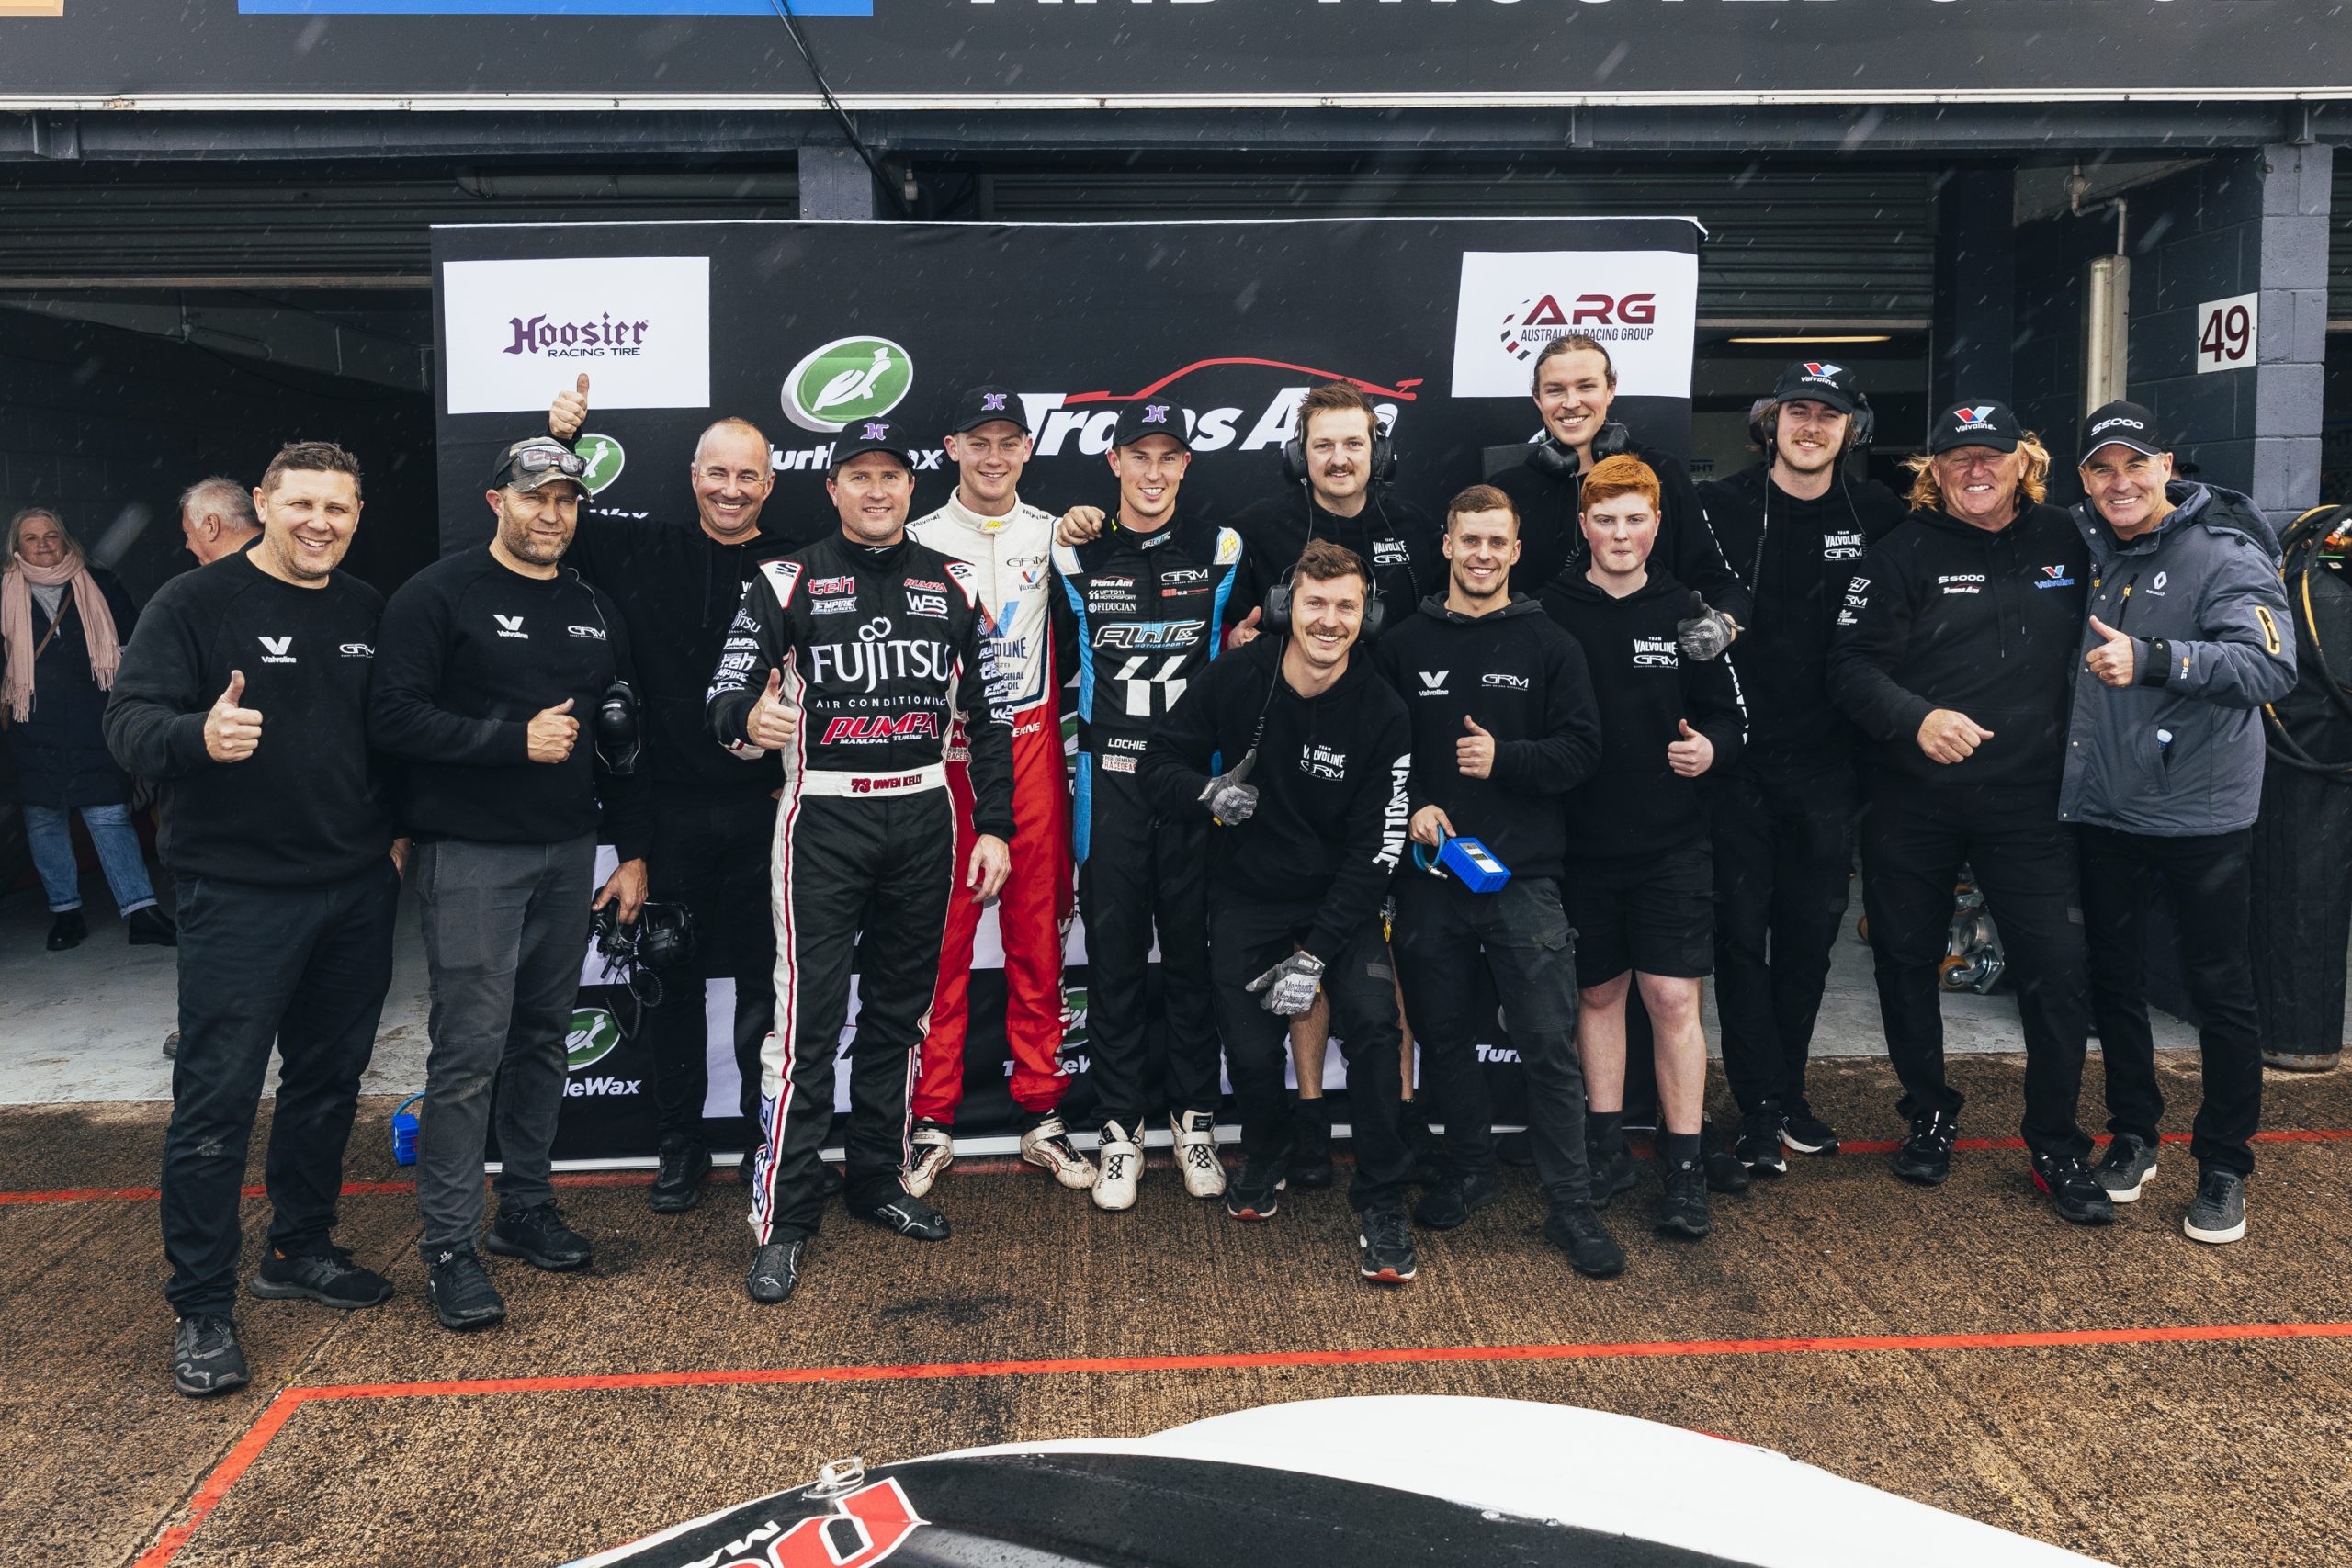 OWEN KELLY WINS FINAL RACE, NATHAN HERNE SEALS THE TITLE